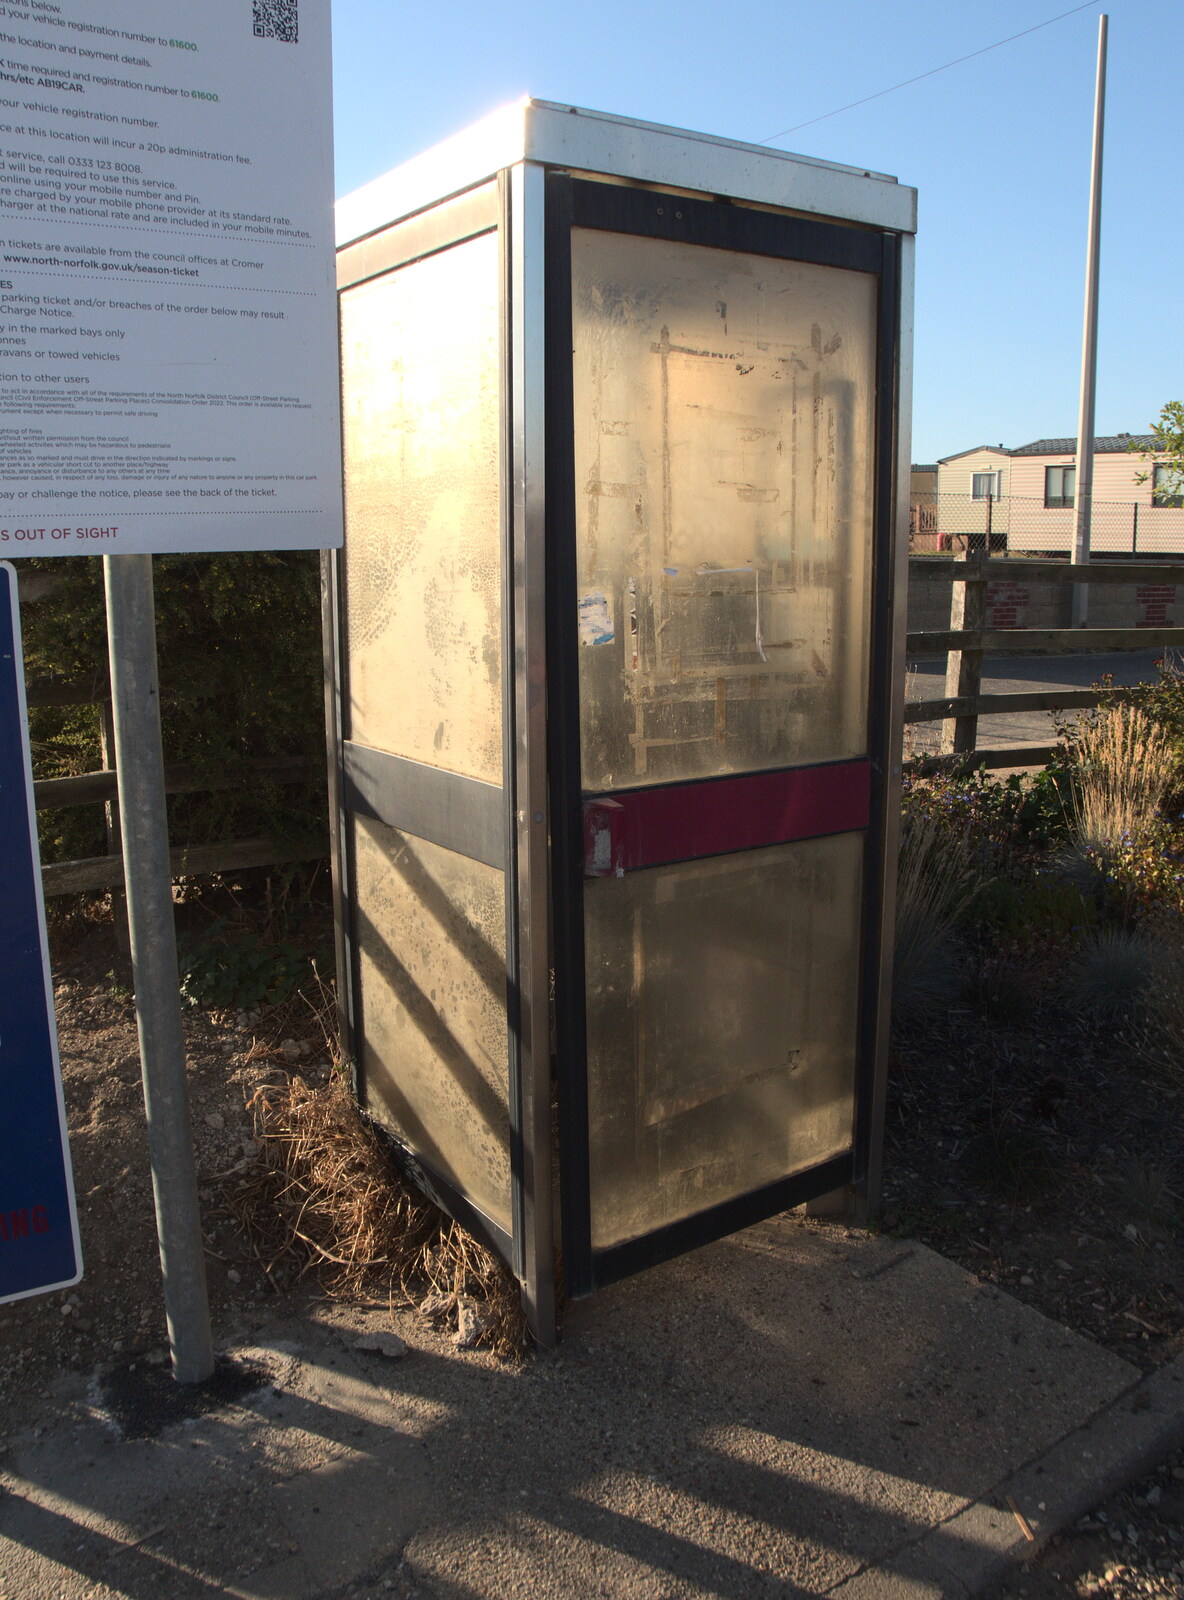 An 80s BT phone box at the car park in East Runton from Camping at Forest Park, Cromer, Norfolk - 12th August 2022